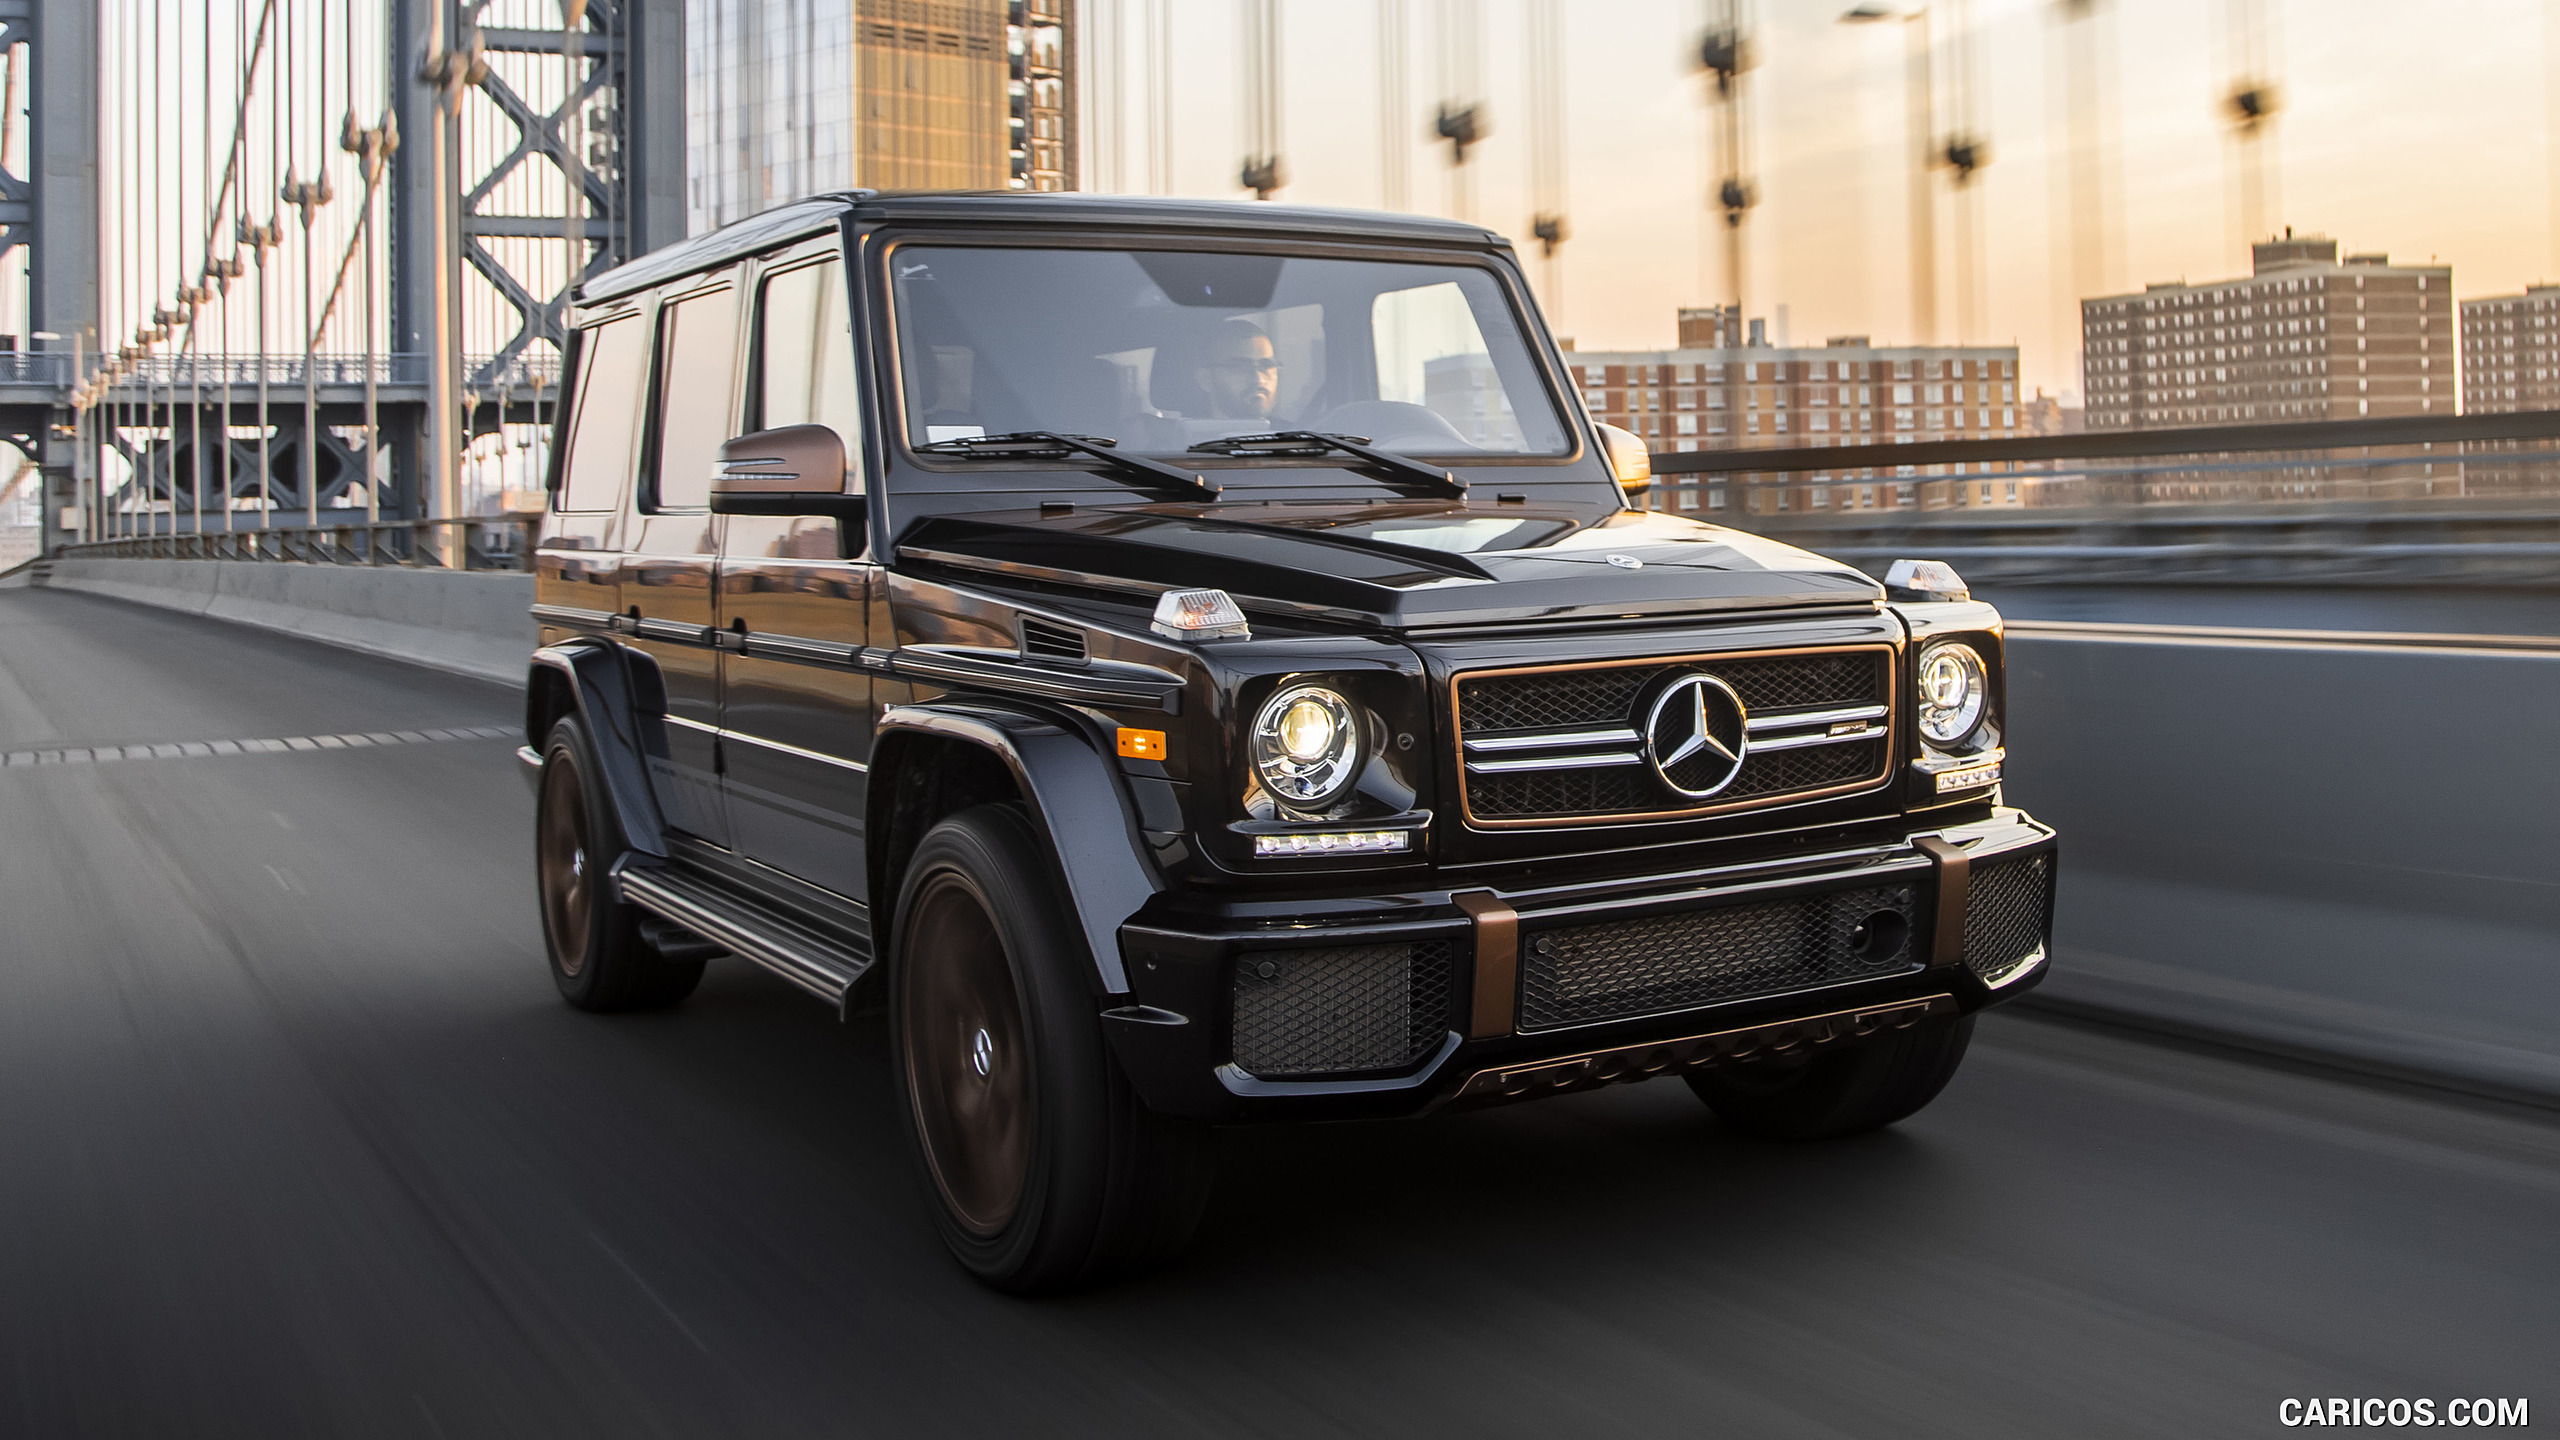 2018 Mercedes-AMG G65 Final Edition (US-Spec) - Front Three-Quarter, #1 of 70